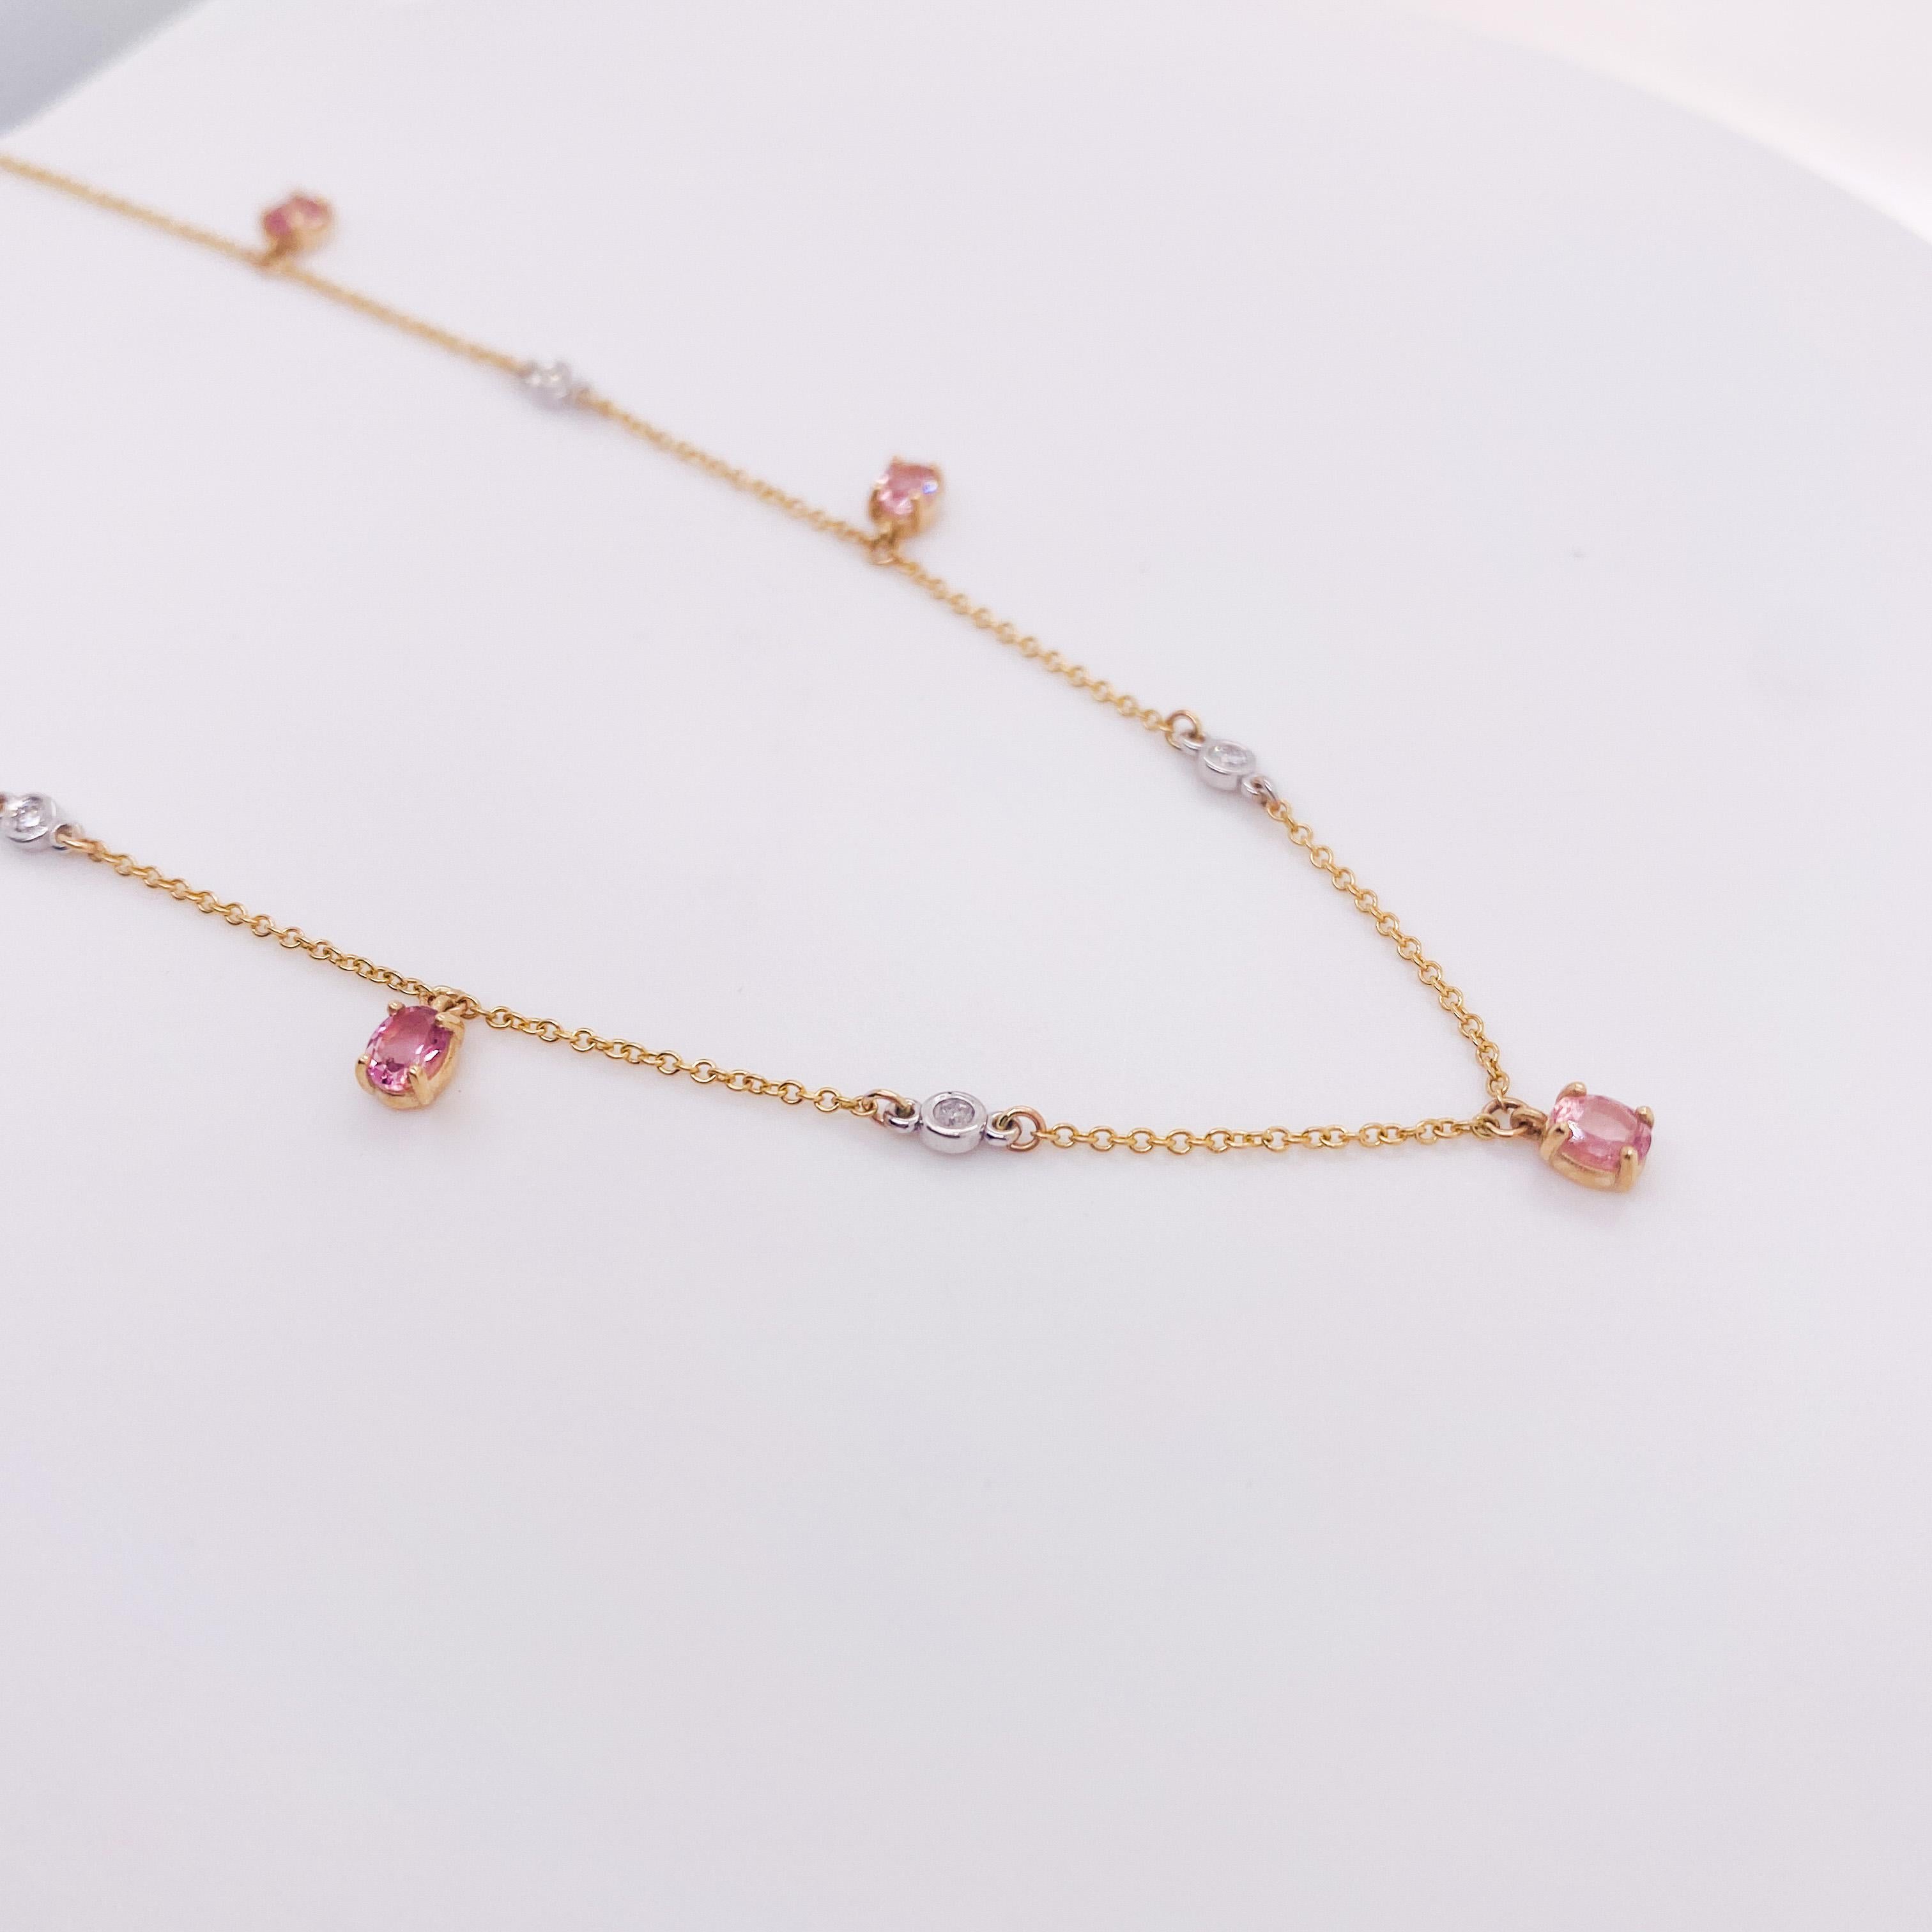 Contemporary Delightful Pink Tourmaline & Diamond Station Necklace 1.15 Carats in 14k Gold LV For Sale